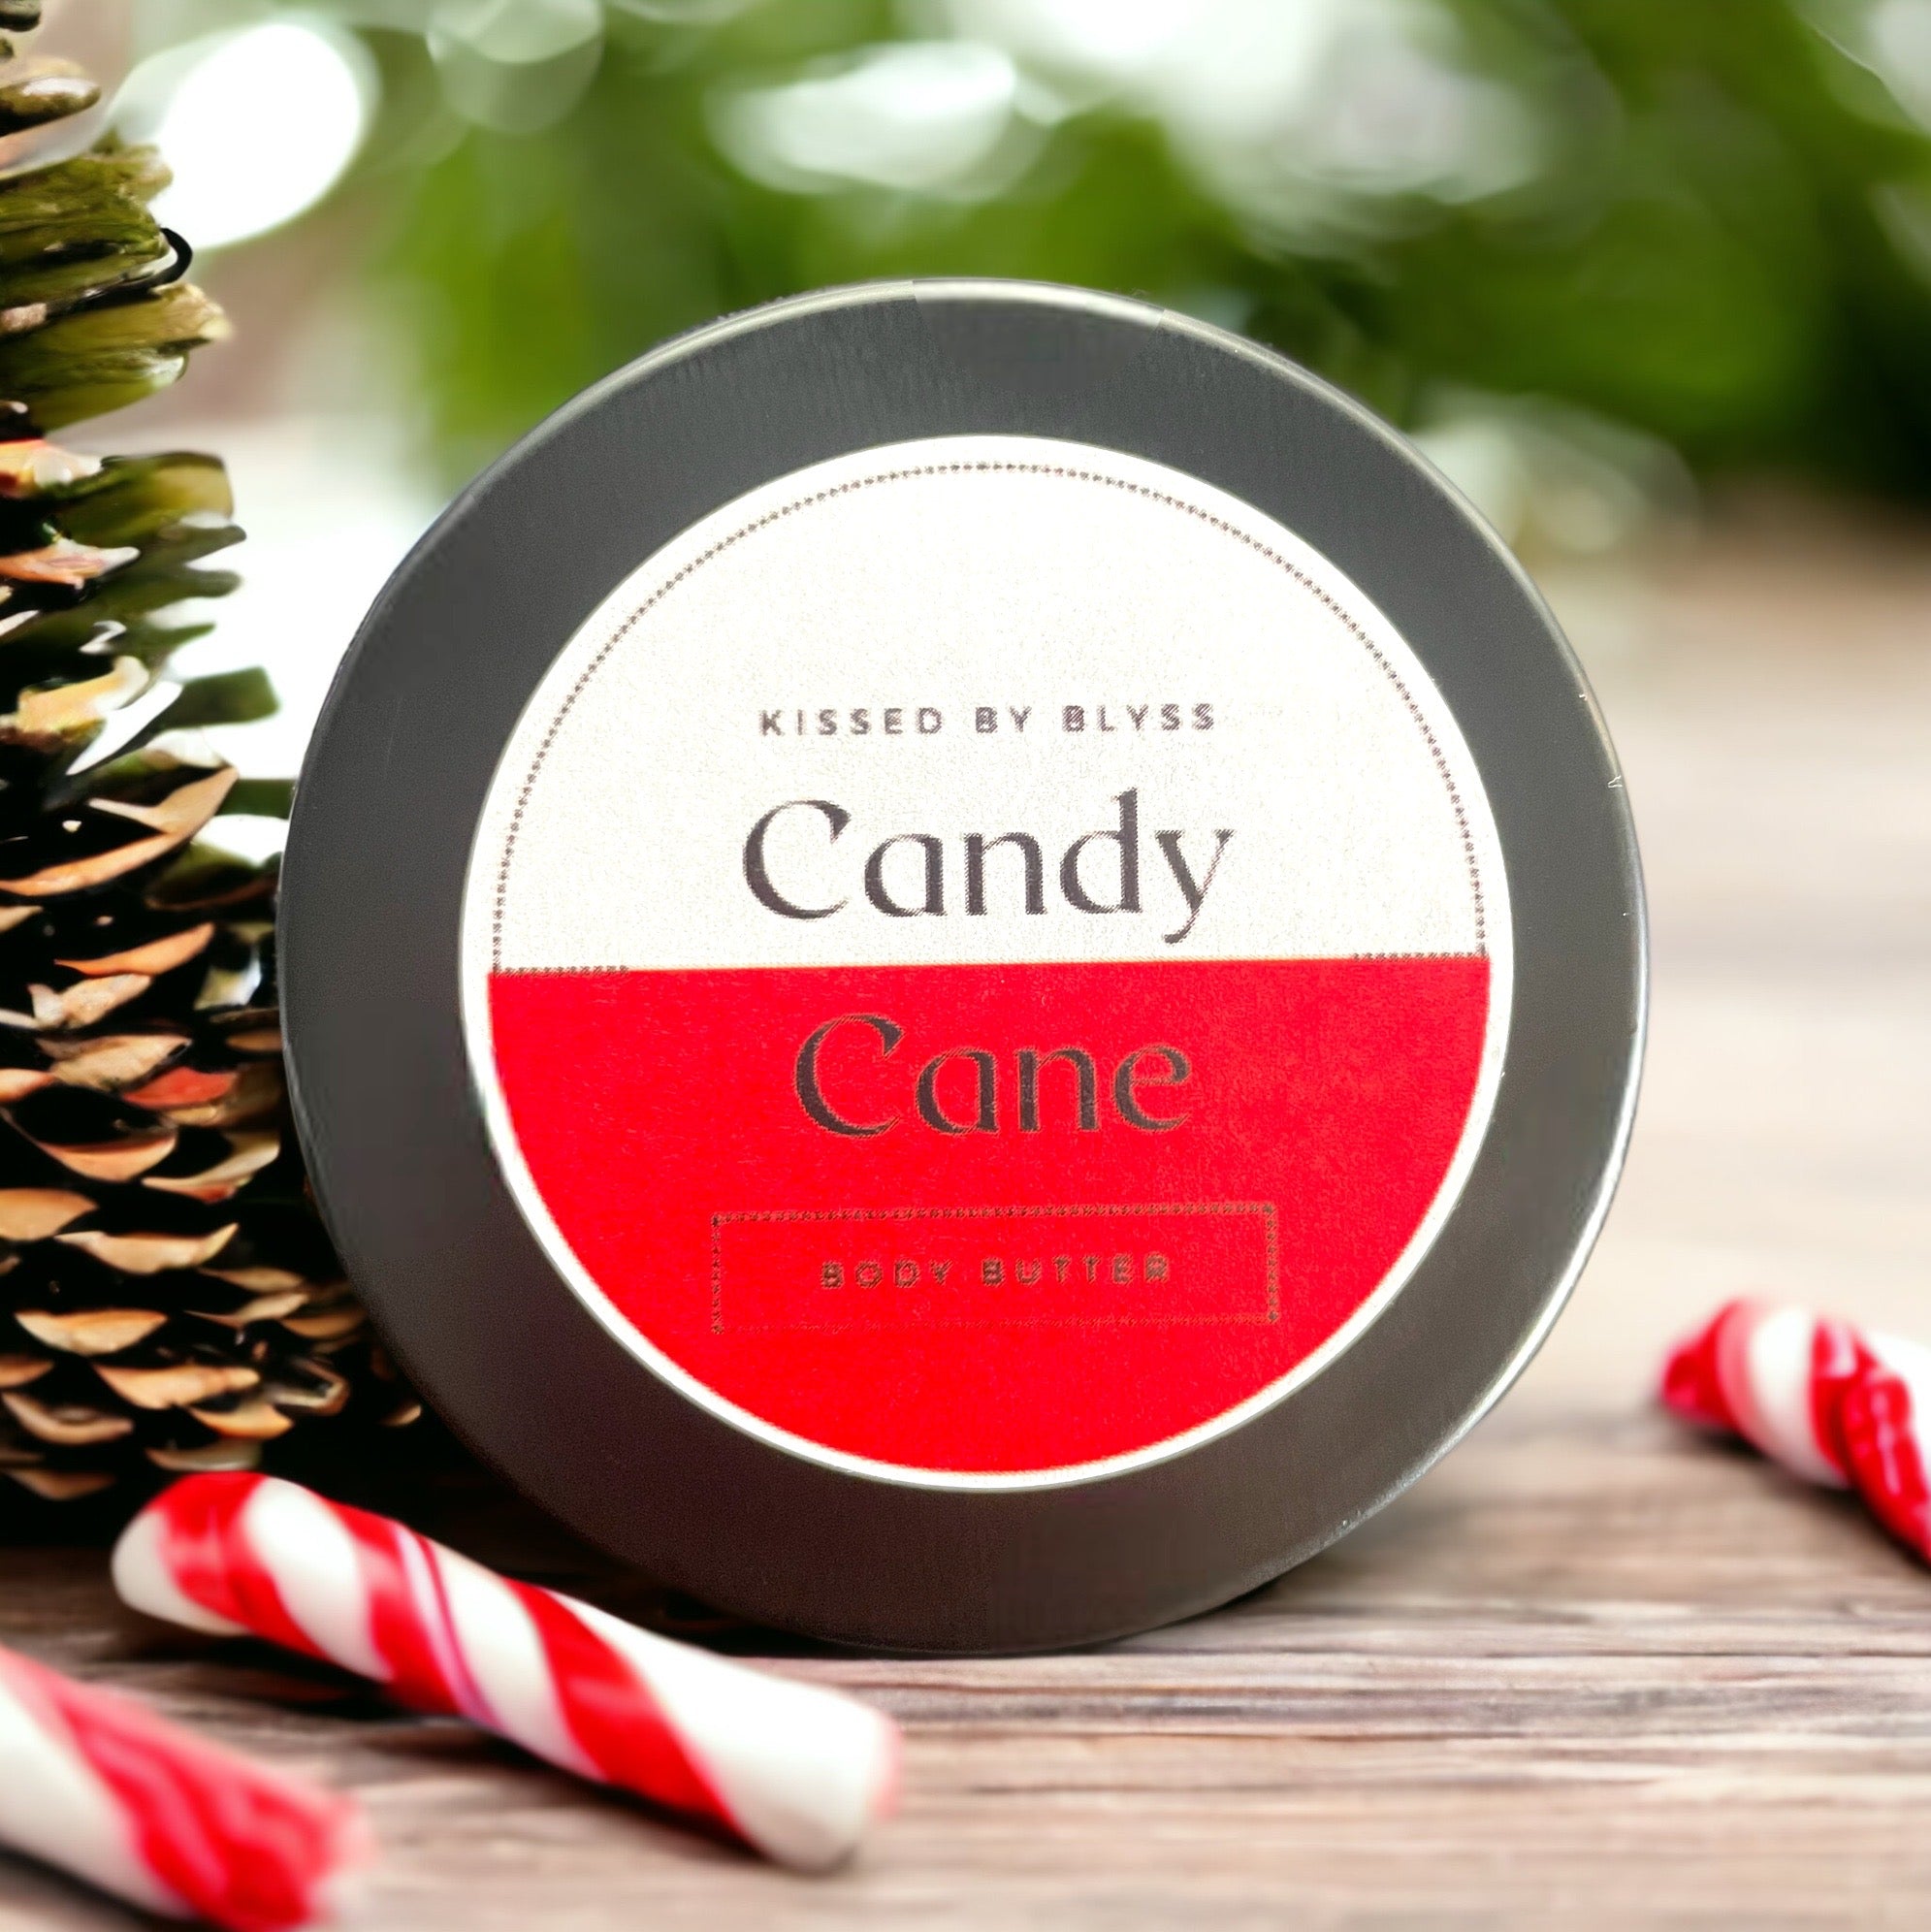 Candy Cane Body Butter